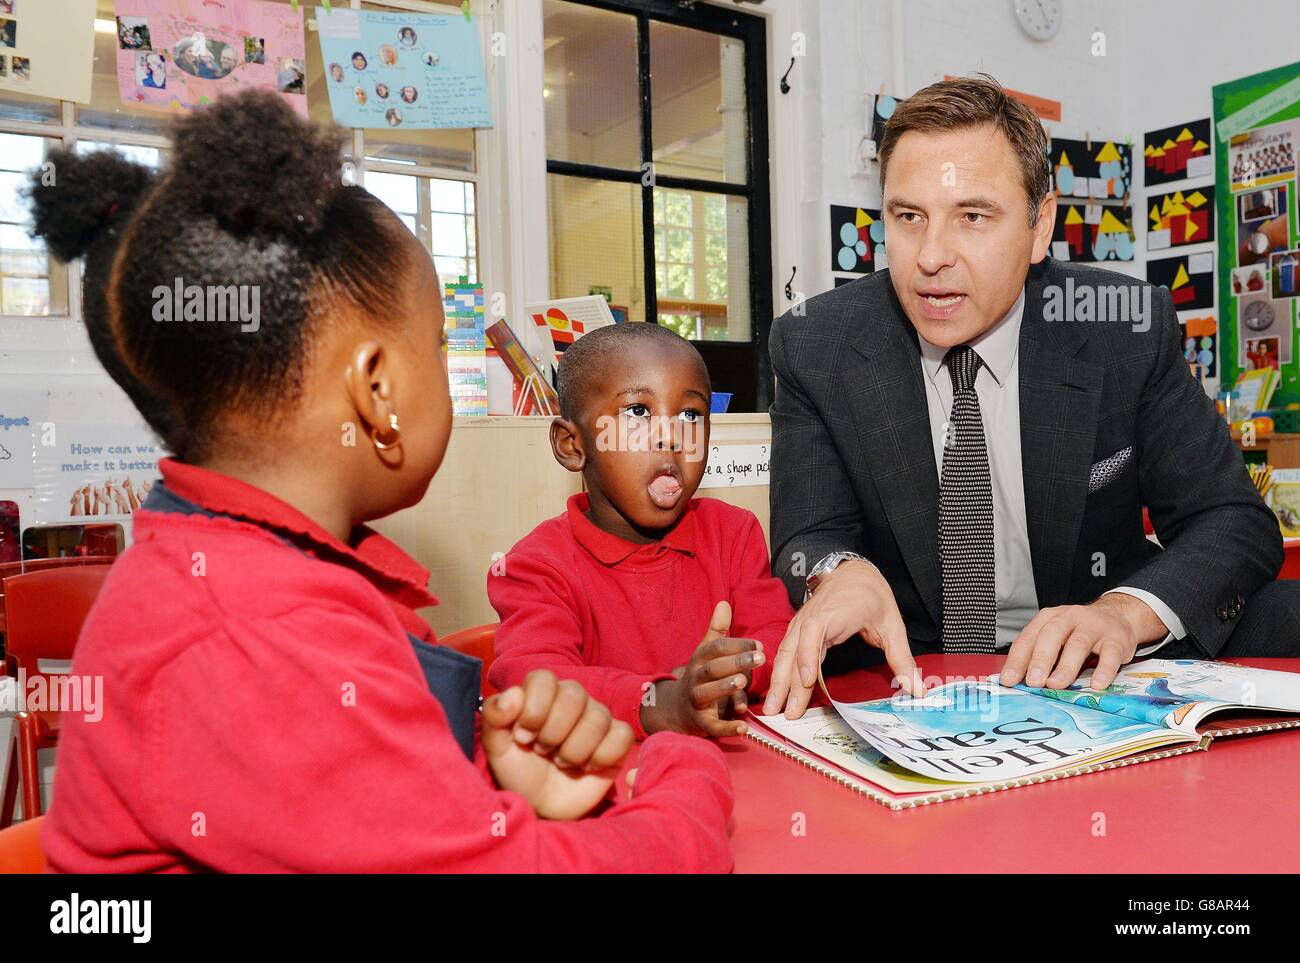 David Walliams Reads From One Of His Books To Young Children At The Stock Photo Alamy